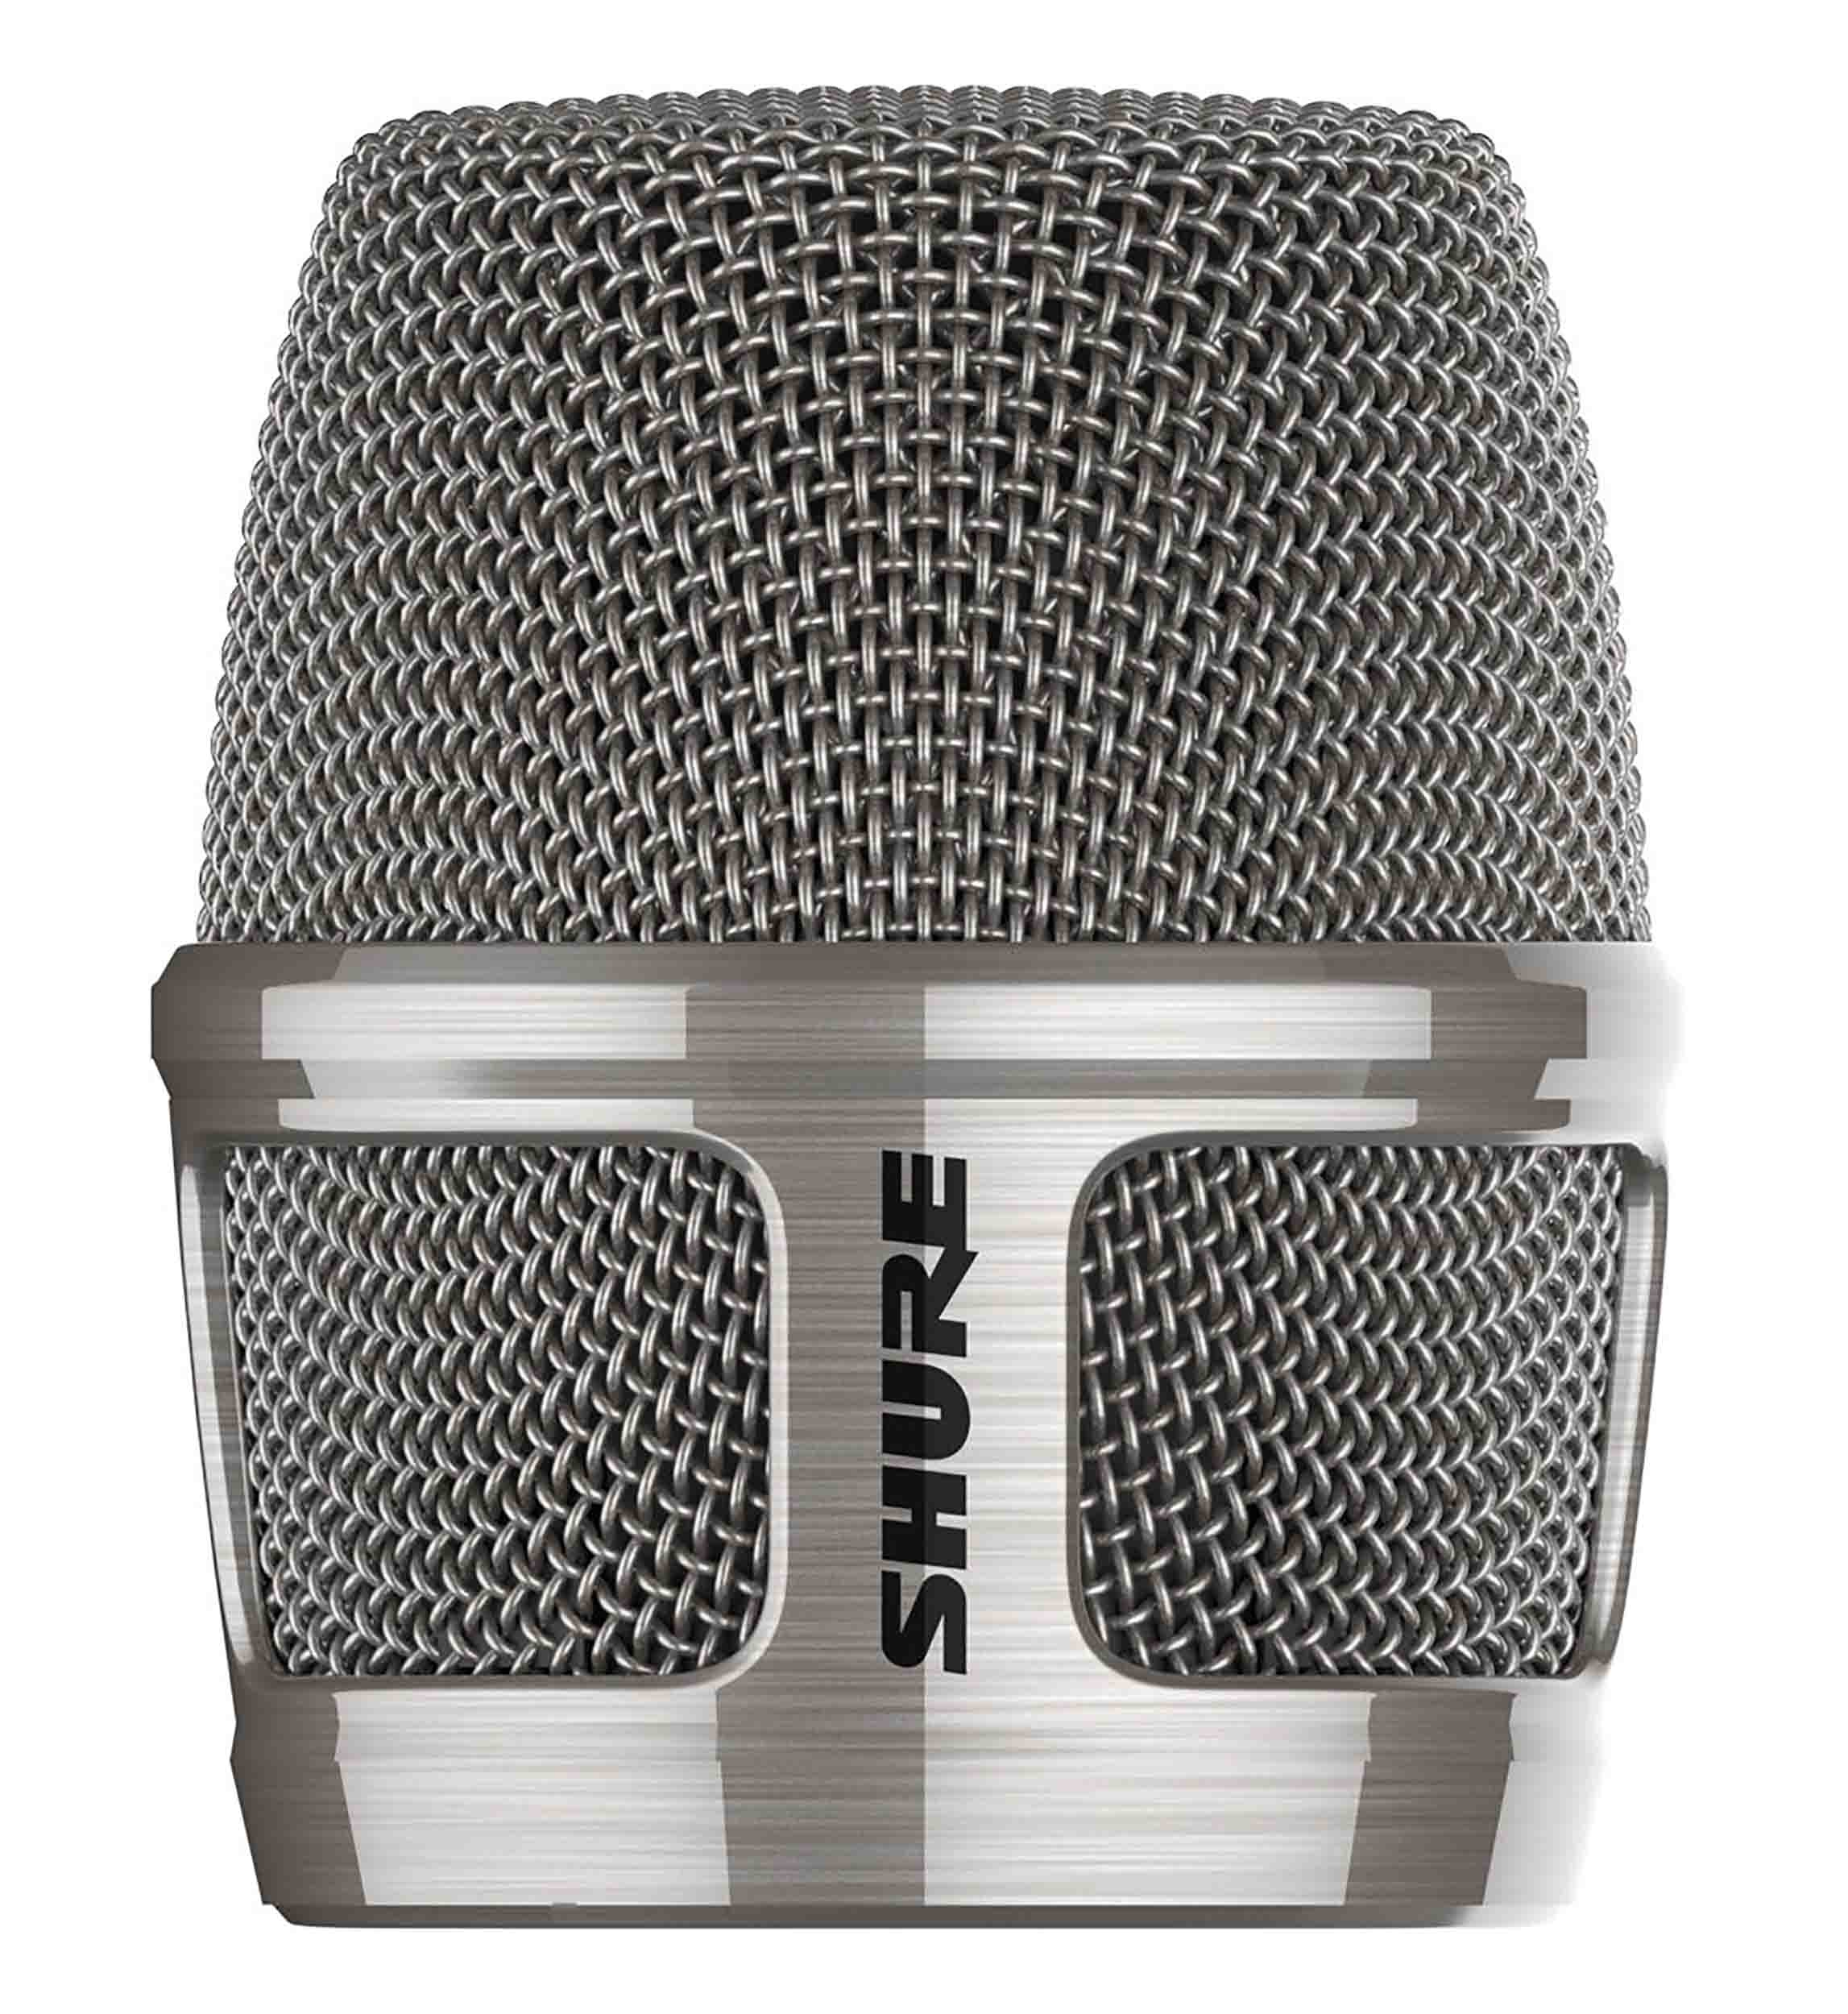 Shure RPM28 Grille for Nexadyne 8/S Supercardioid Microphone by Shure